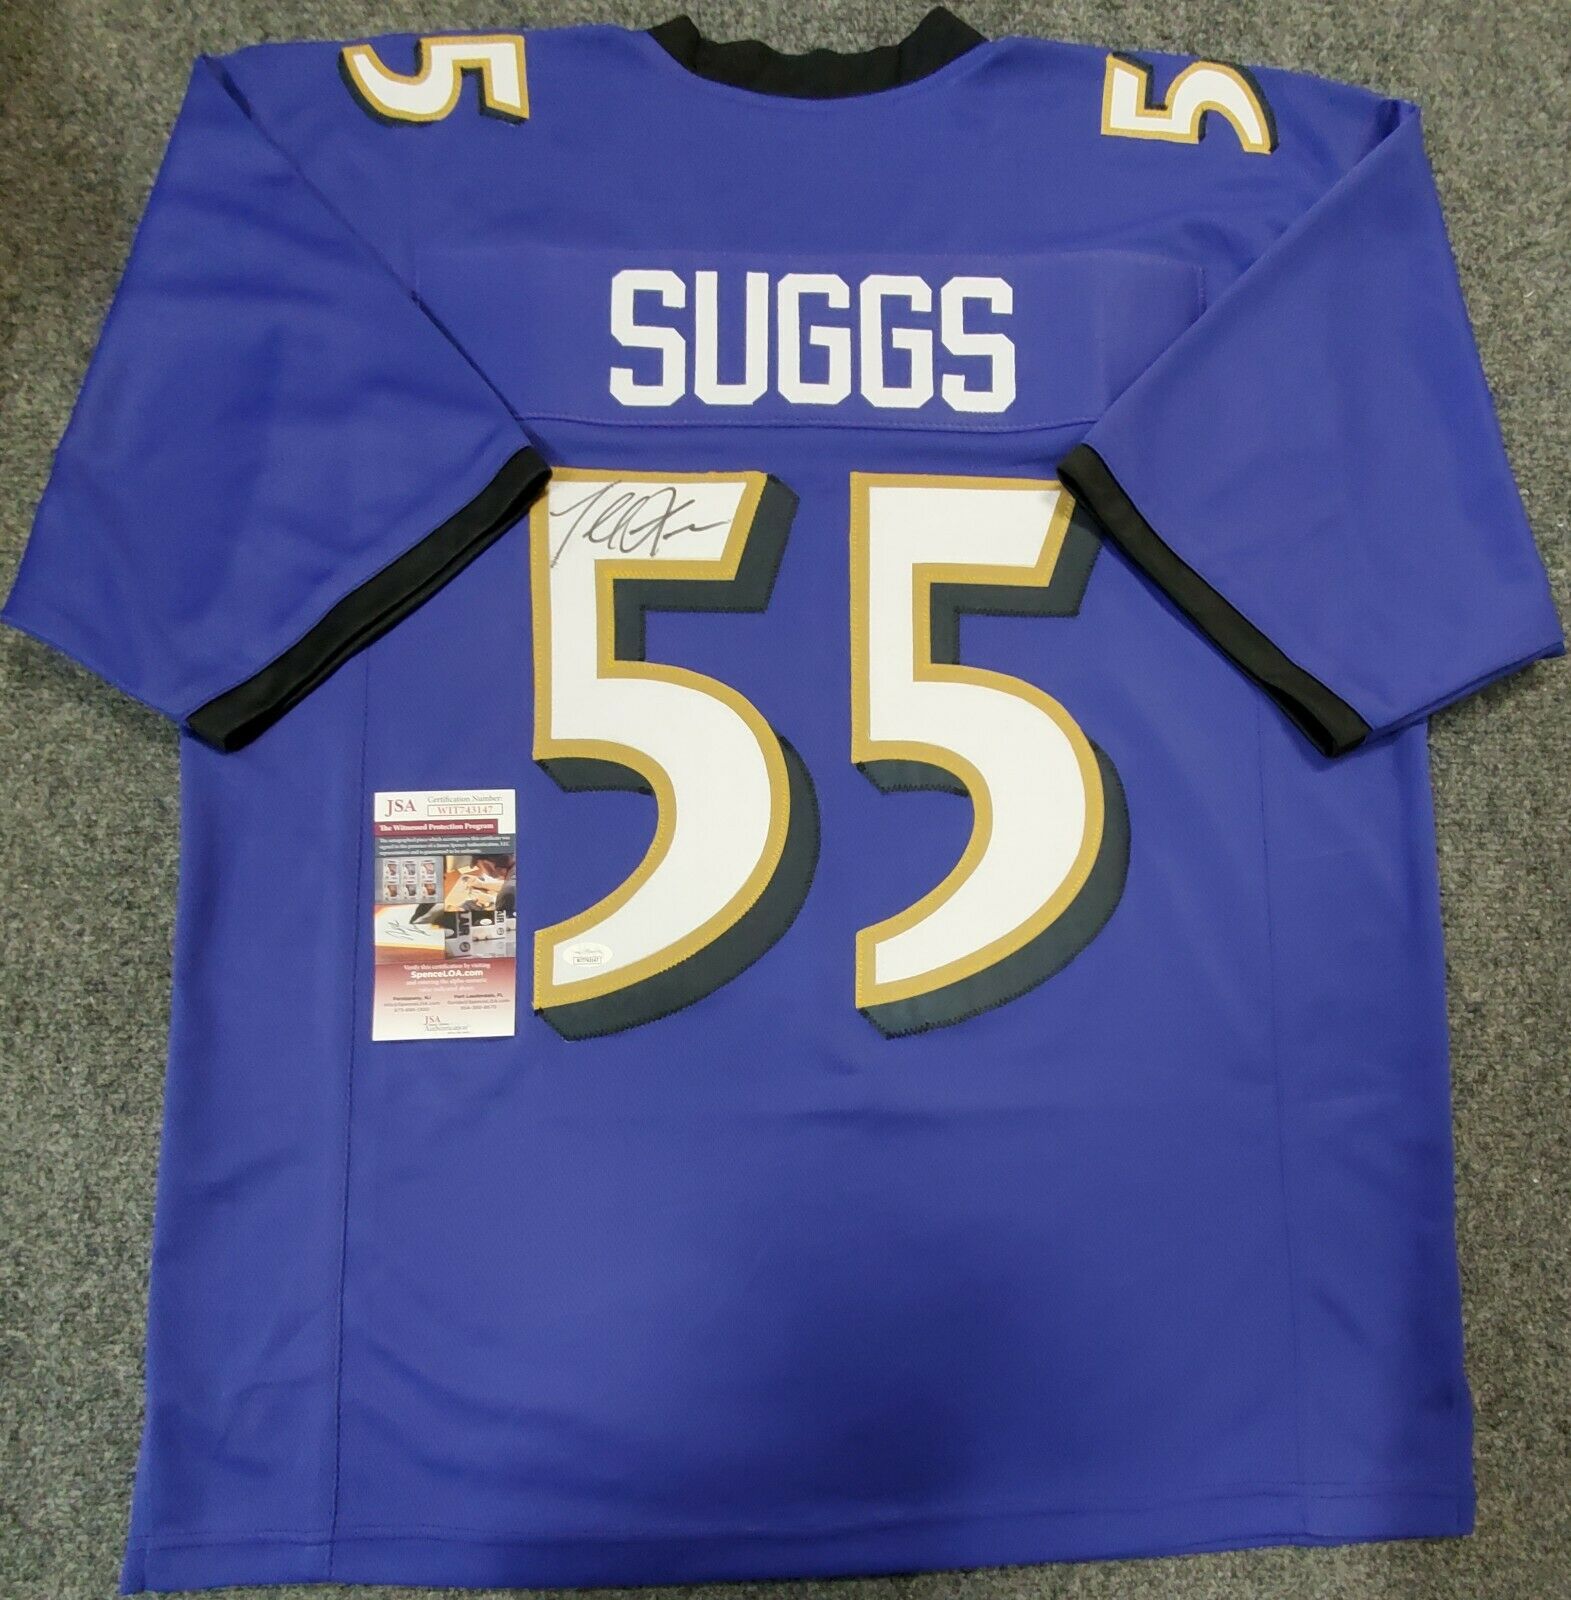 suggs signed jersey